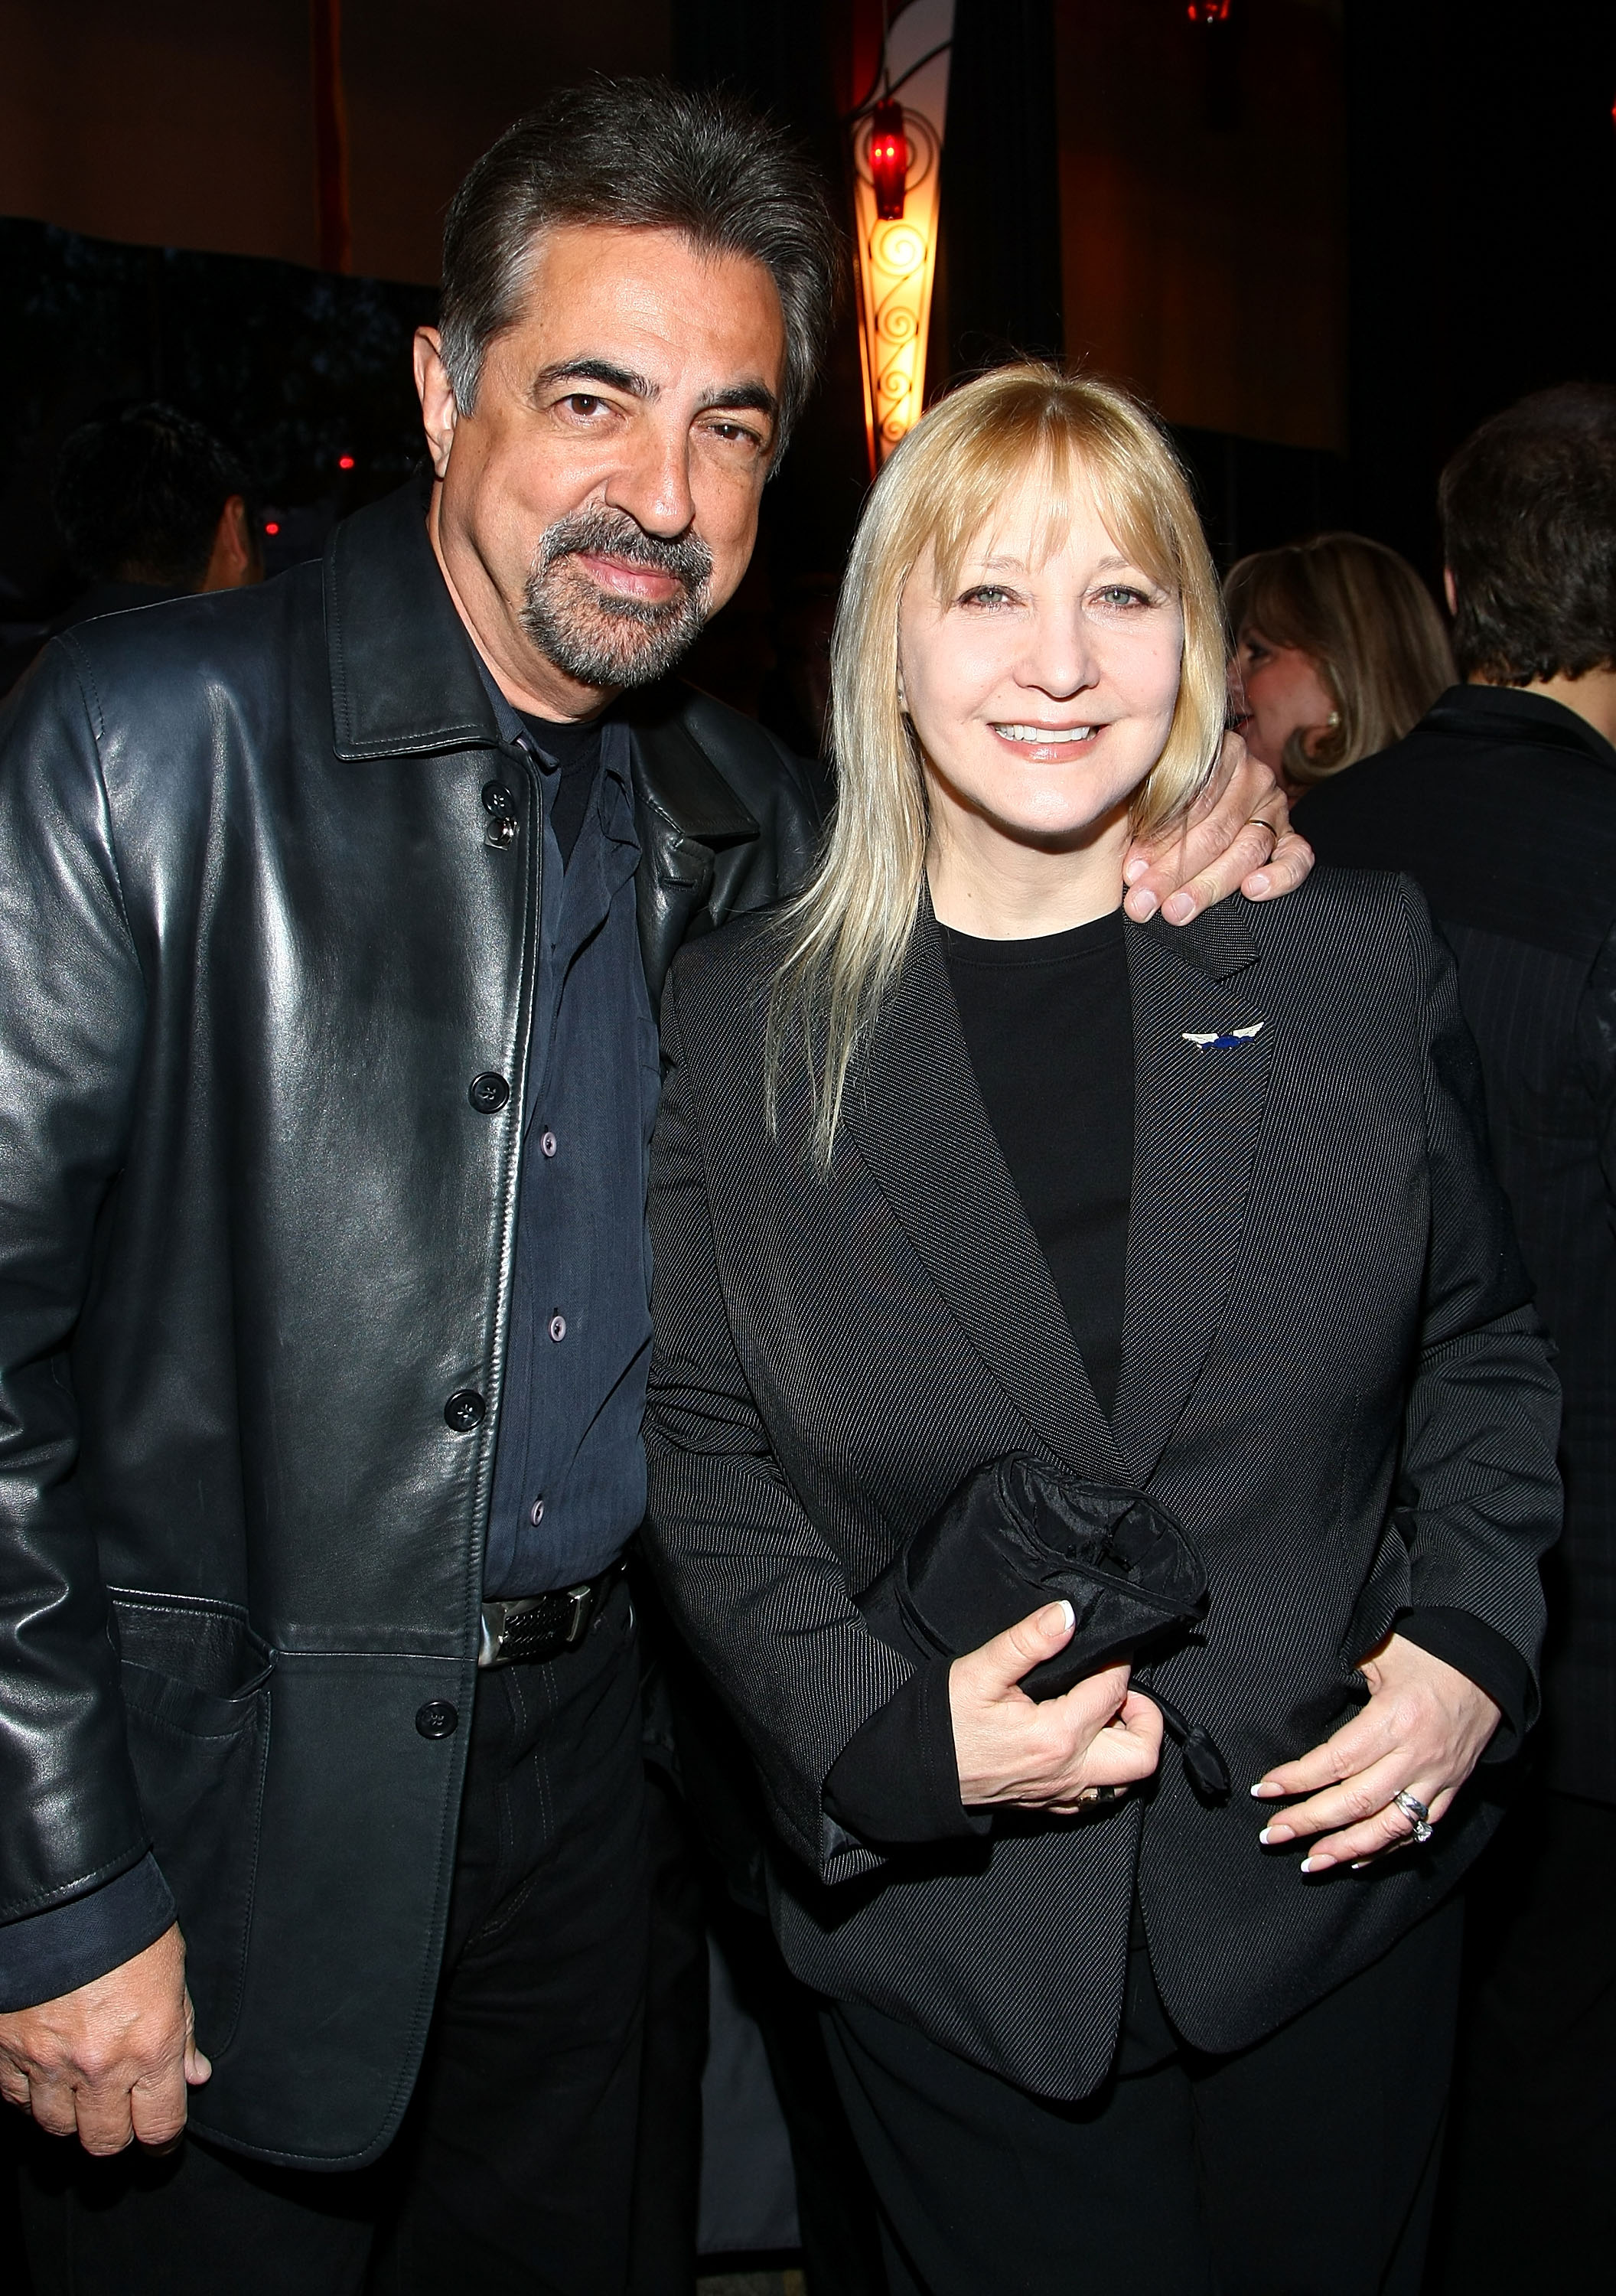 Joe Mantegna and Arlene Vhrel at The Tonys Go Hollywood event in West Hollywood, California on April 3, 2008 | Source: Getty Images